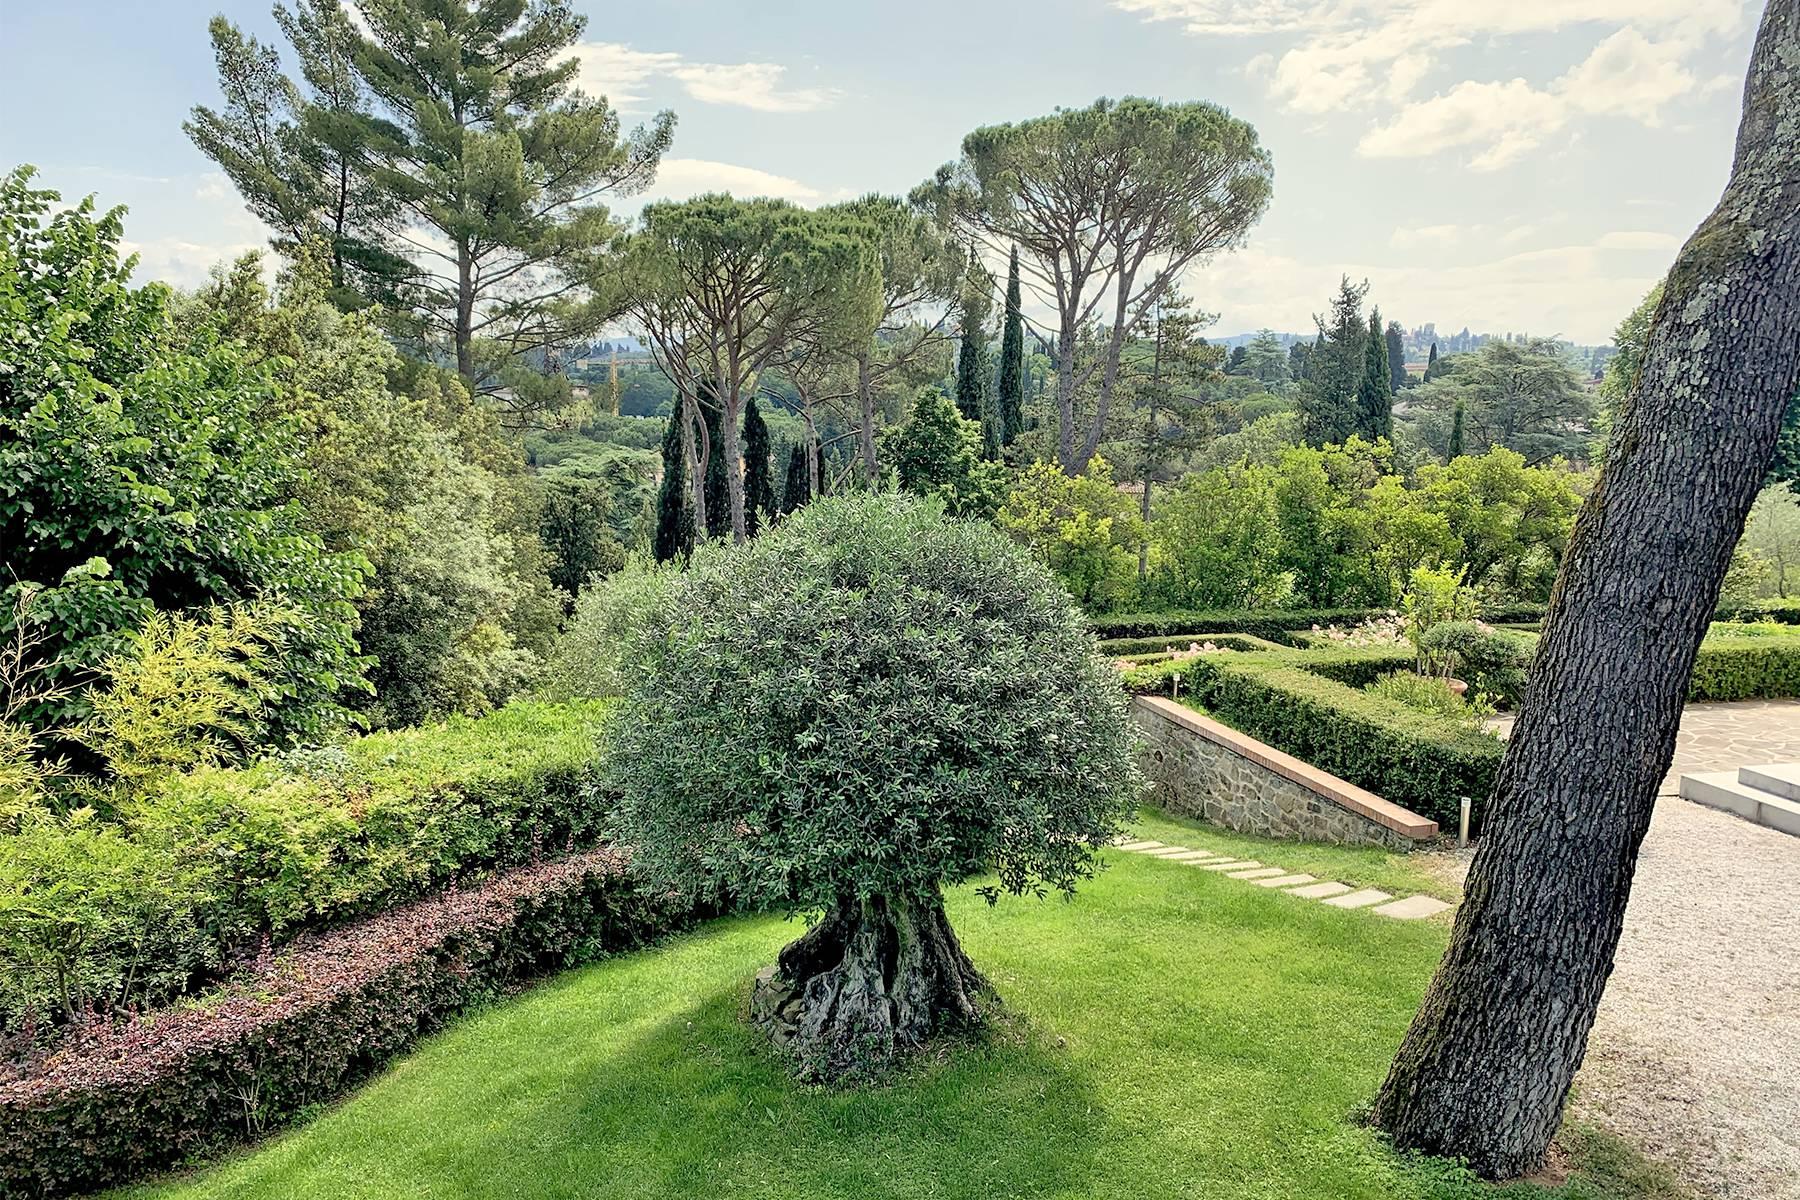 Splendid villa with pool on the Poggio Imperiale hill in Florence - 20